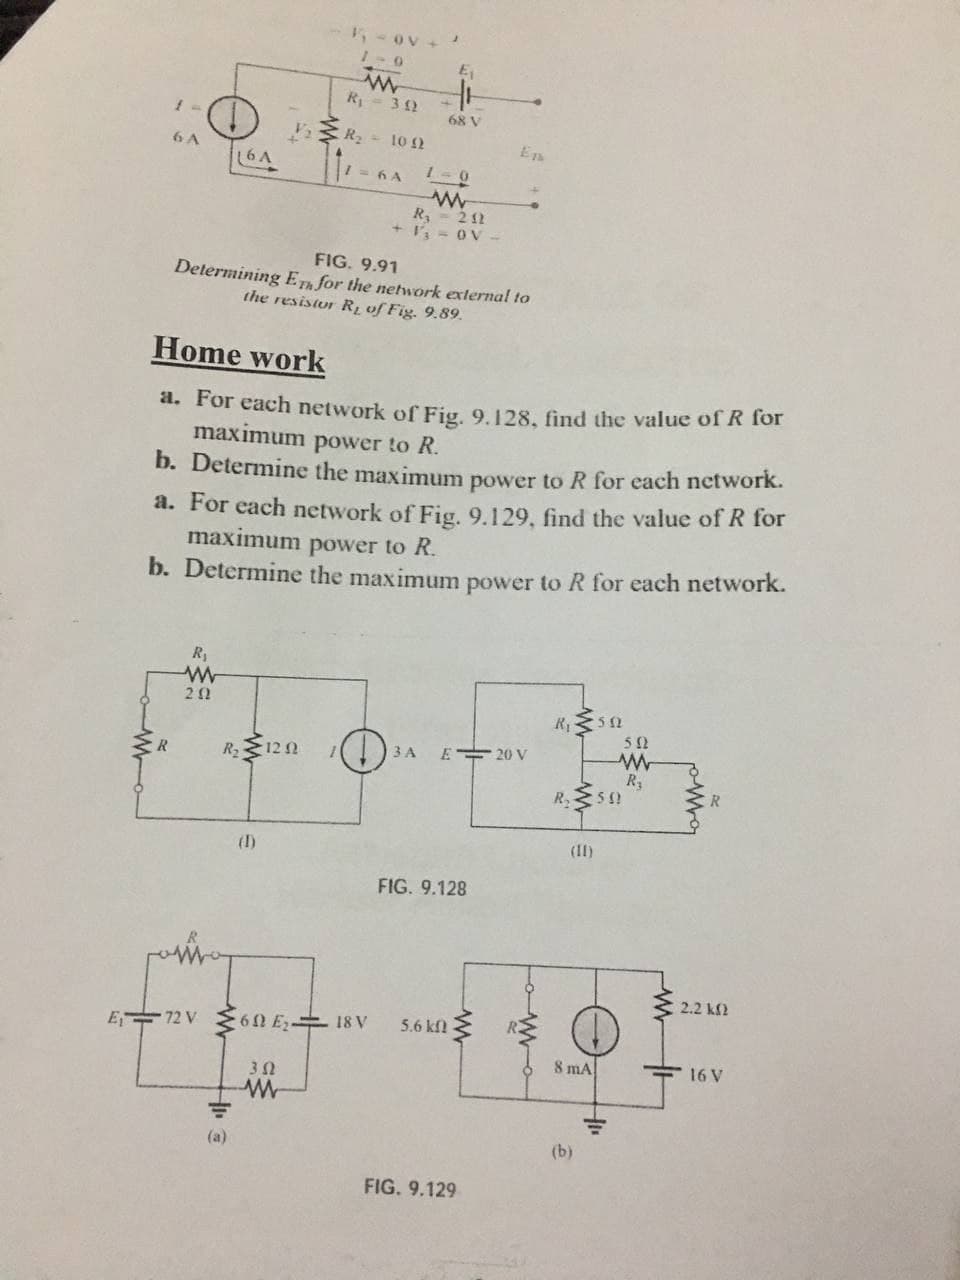 5-ov +
1-0
R 3 2
68 V
R- 10 2
6 A
(6A
1 = 6 A
1-0
R - 2 12
+ I = OV
FIG. 9.91
Determining ET for the network external to
the resistor Rị of Fig. 9.89.
Home work
a. For each network of Fig, 9.128, fnd the value of R for
maximum power to R.
b. Determine the maximum power to R for each network.
a. För each network of Fig. 9.129, find the value of R for
maximum power to R.
b. Determine the maximum power to R for each network.
3 A
E 20 V
CR
R 12 0
R3
(1)
(II)
FIG. 9.128
2.2 kf2
E 72 V E 60 E 18 V
5.6 kfl
8 mA
E 16 V
(a)
(b)
FIG. 9.129
